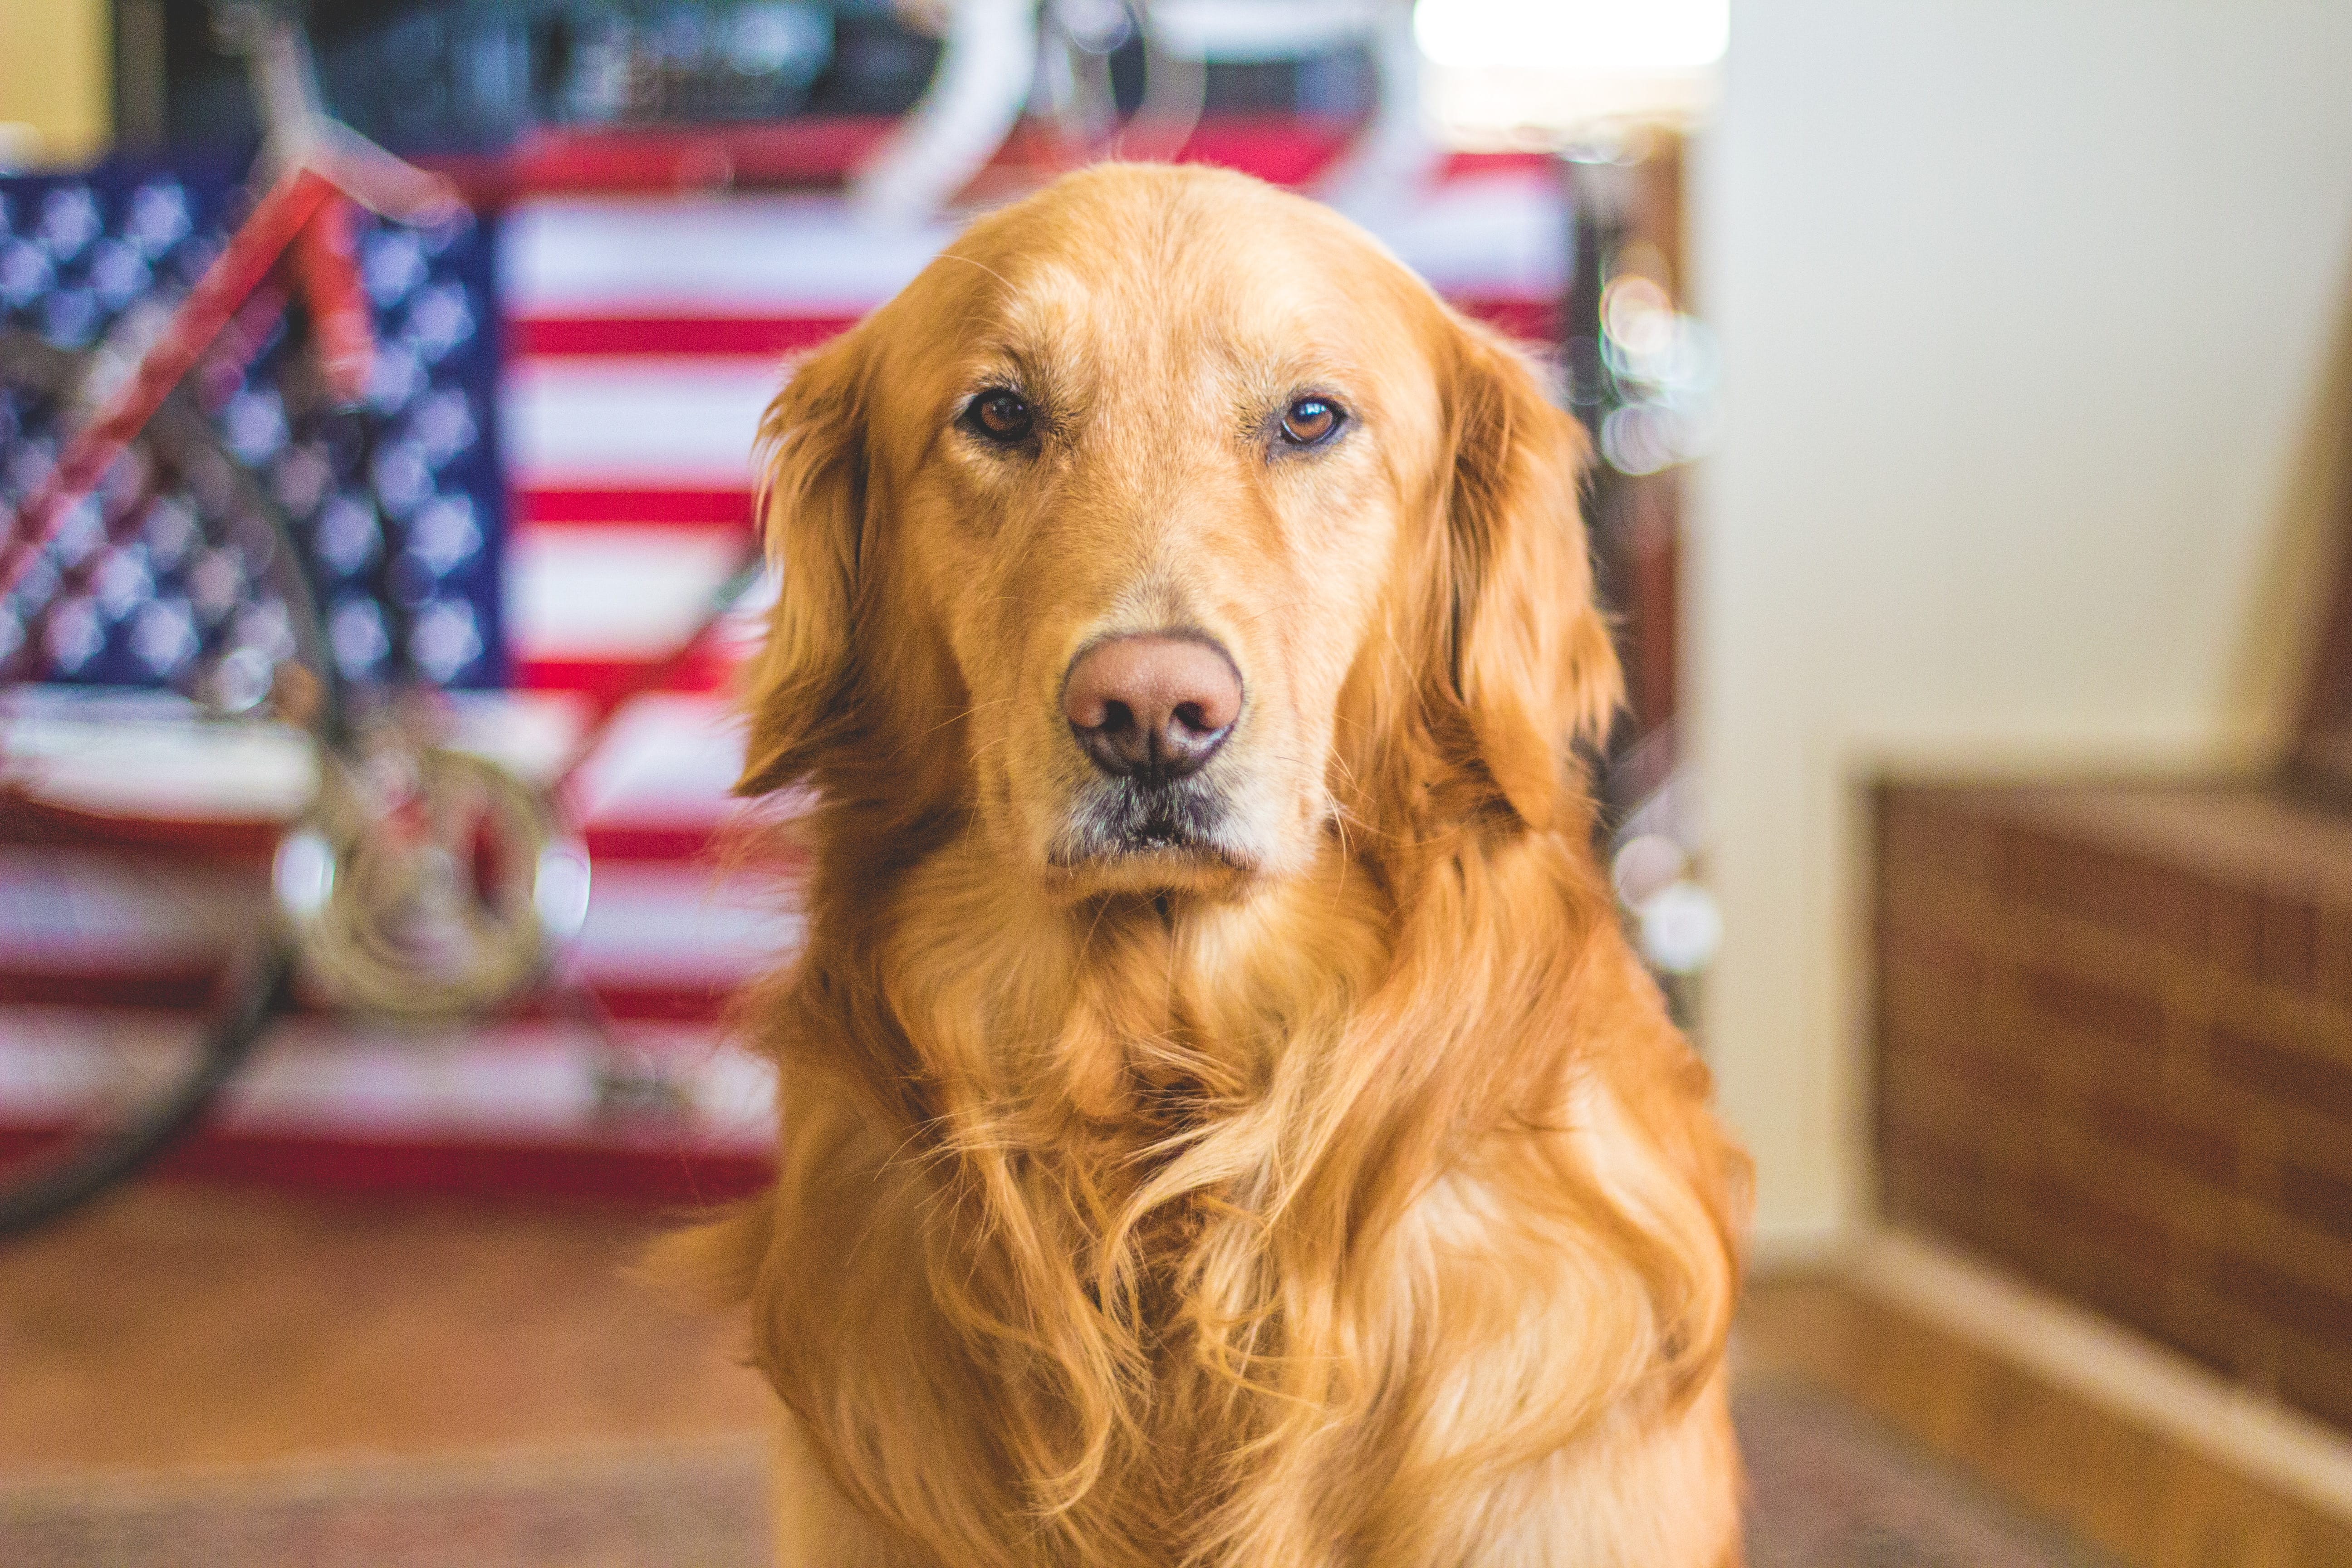 image of a dog in front of an american flag for an article about depth of field camera settings